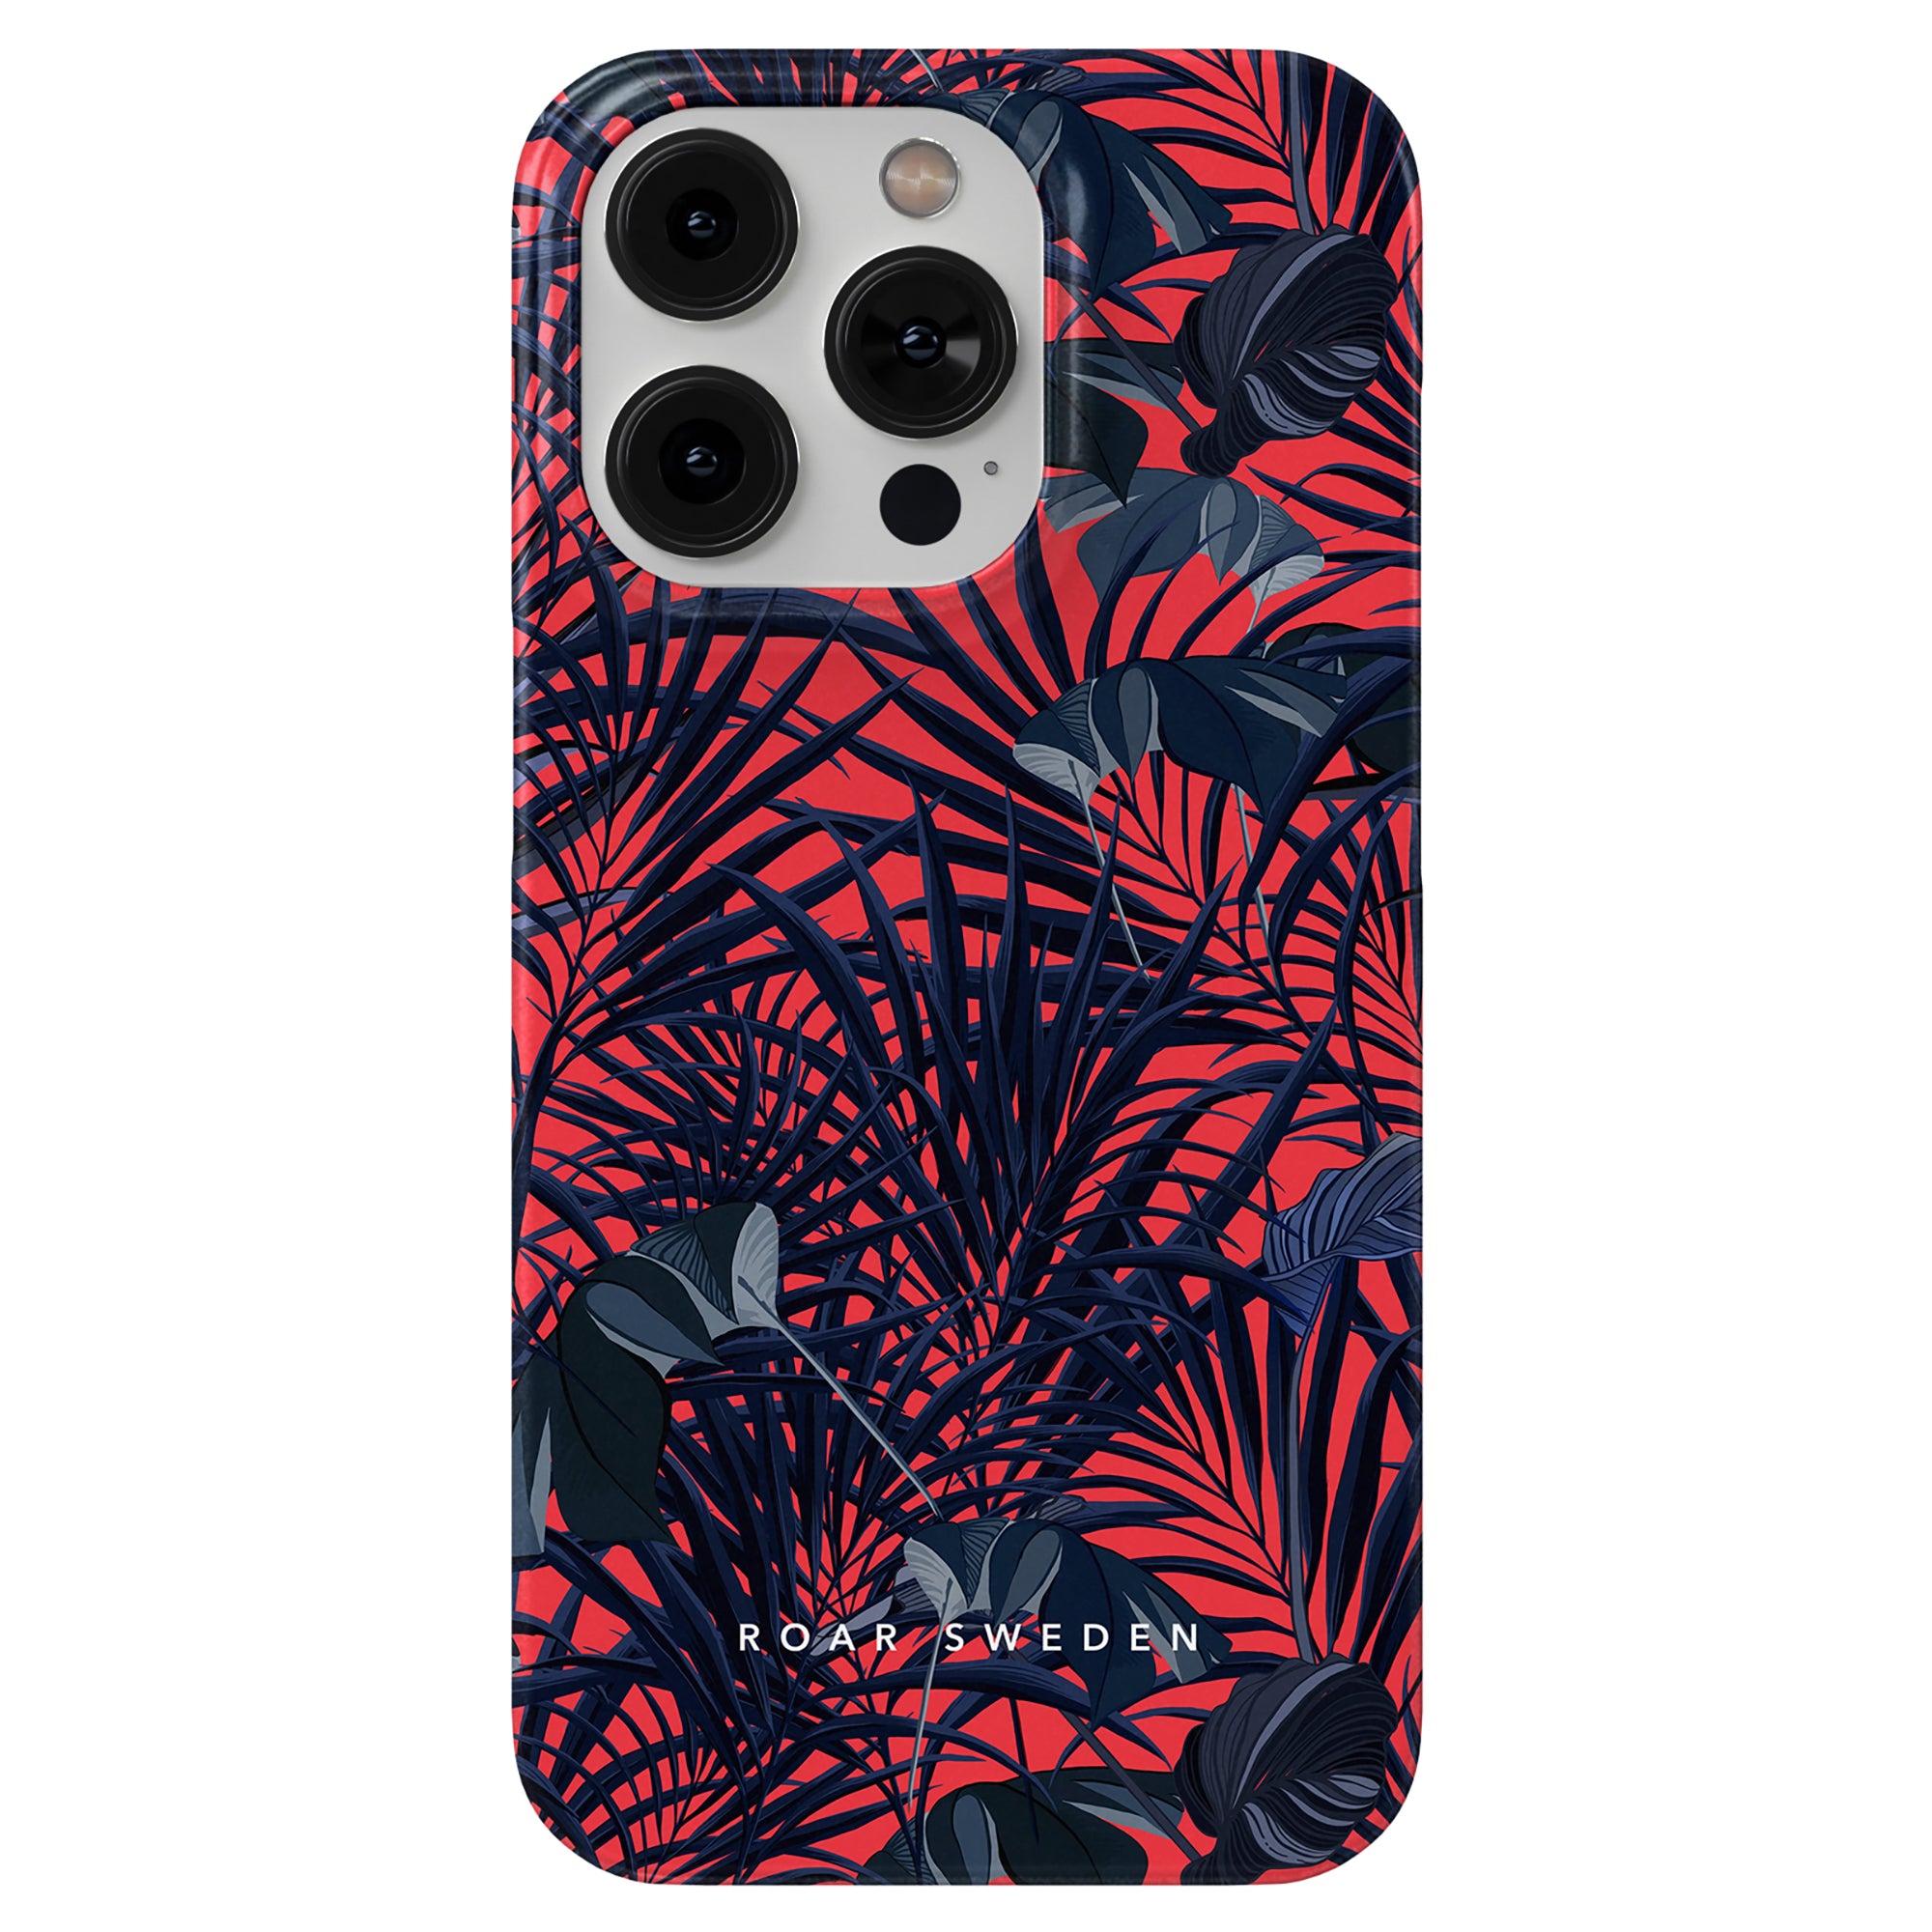 A smartphone with a floral-patterned, slim case featuring dark blue leaves on a red background, part of the Jungle Collection. The Red Tropics - Slim case has "Roar Sweden" branding.